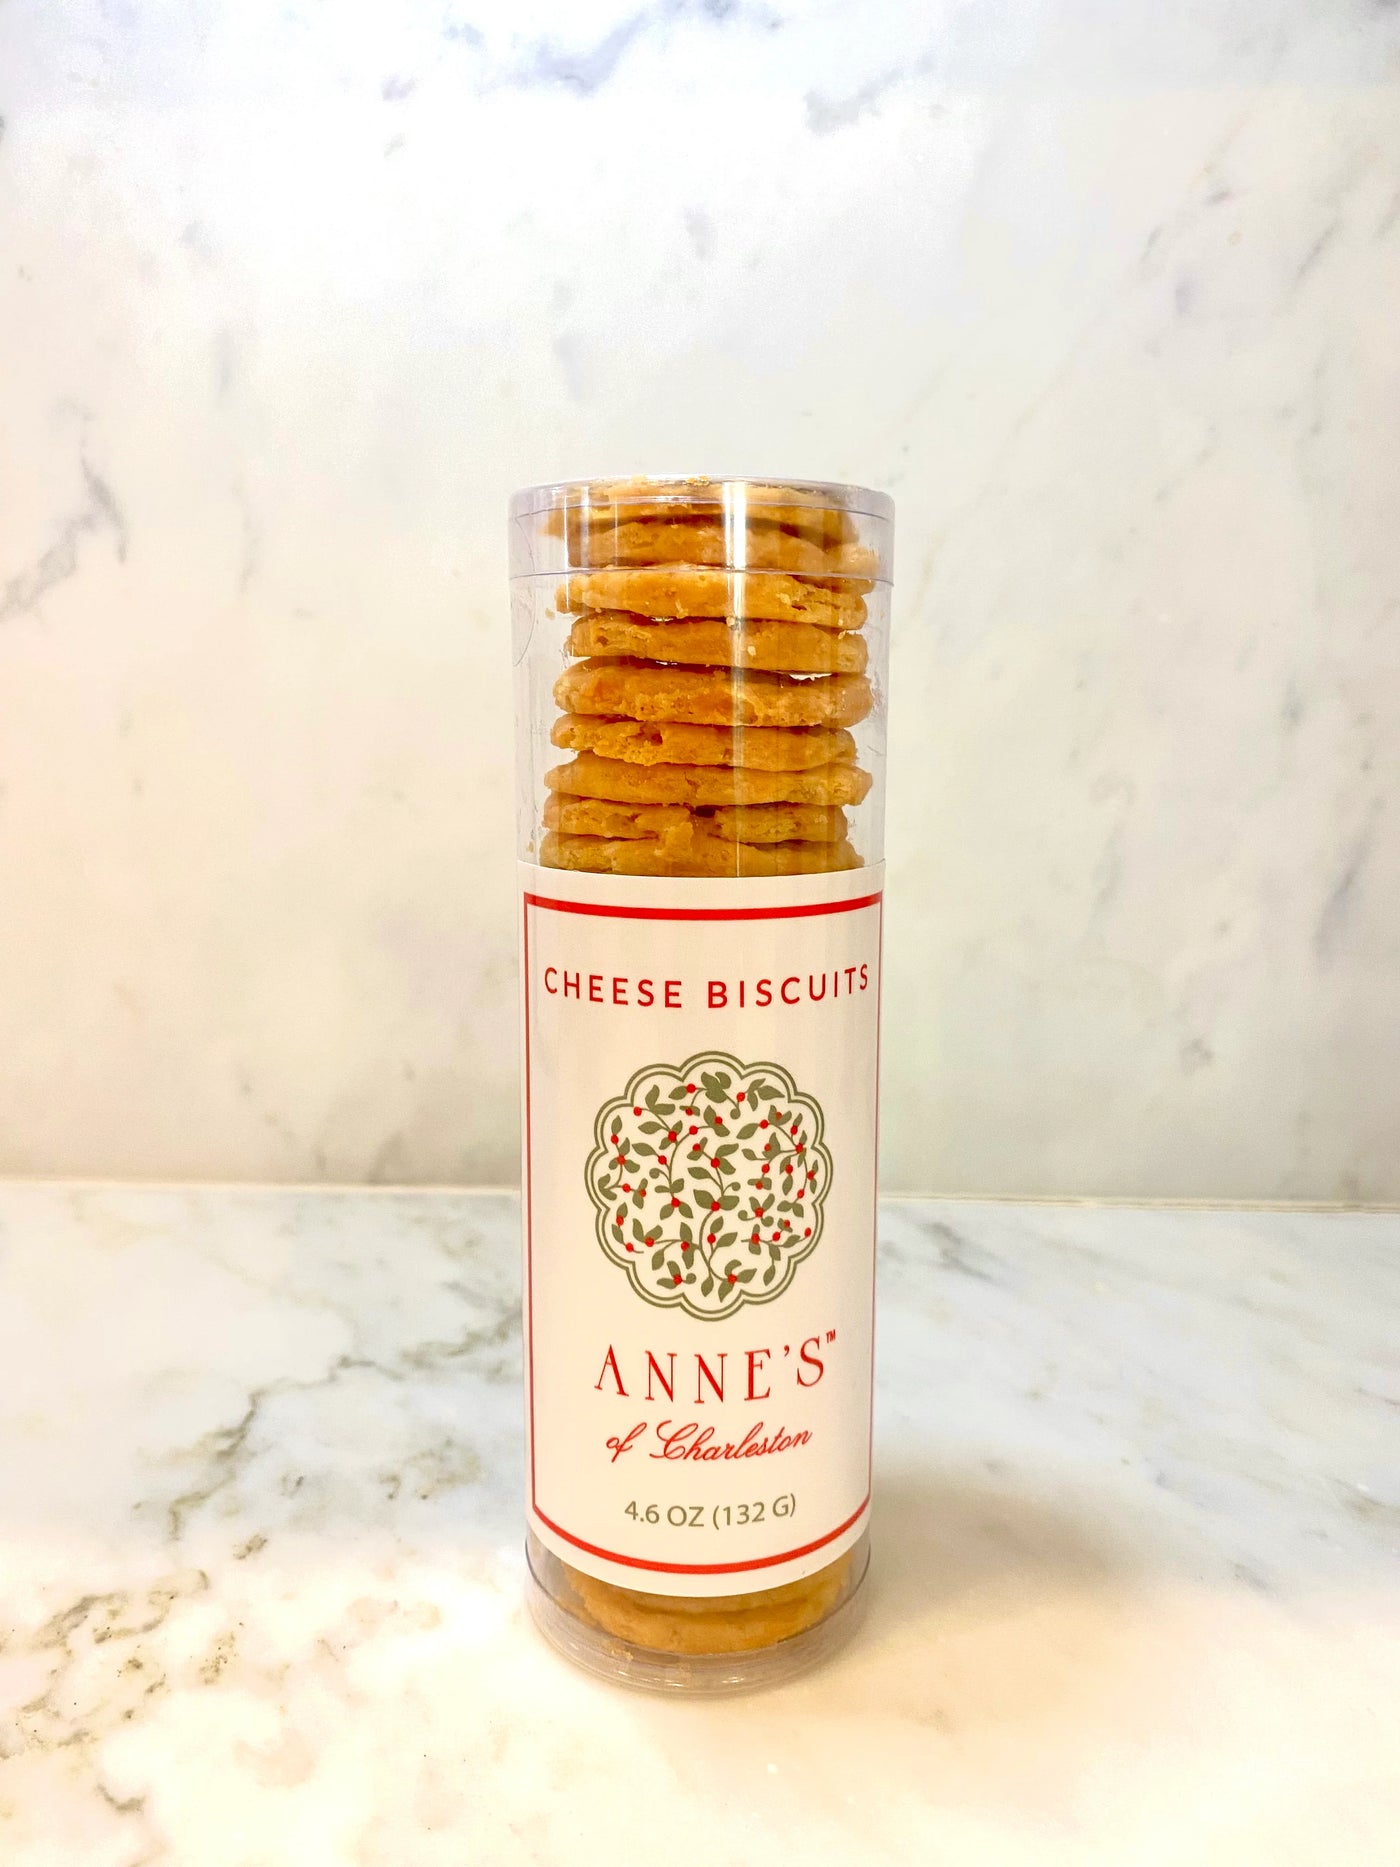 Anne's of Charleston Cheese Biscuits